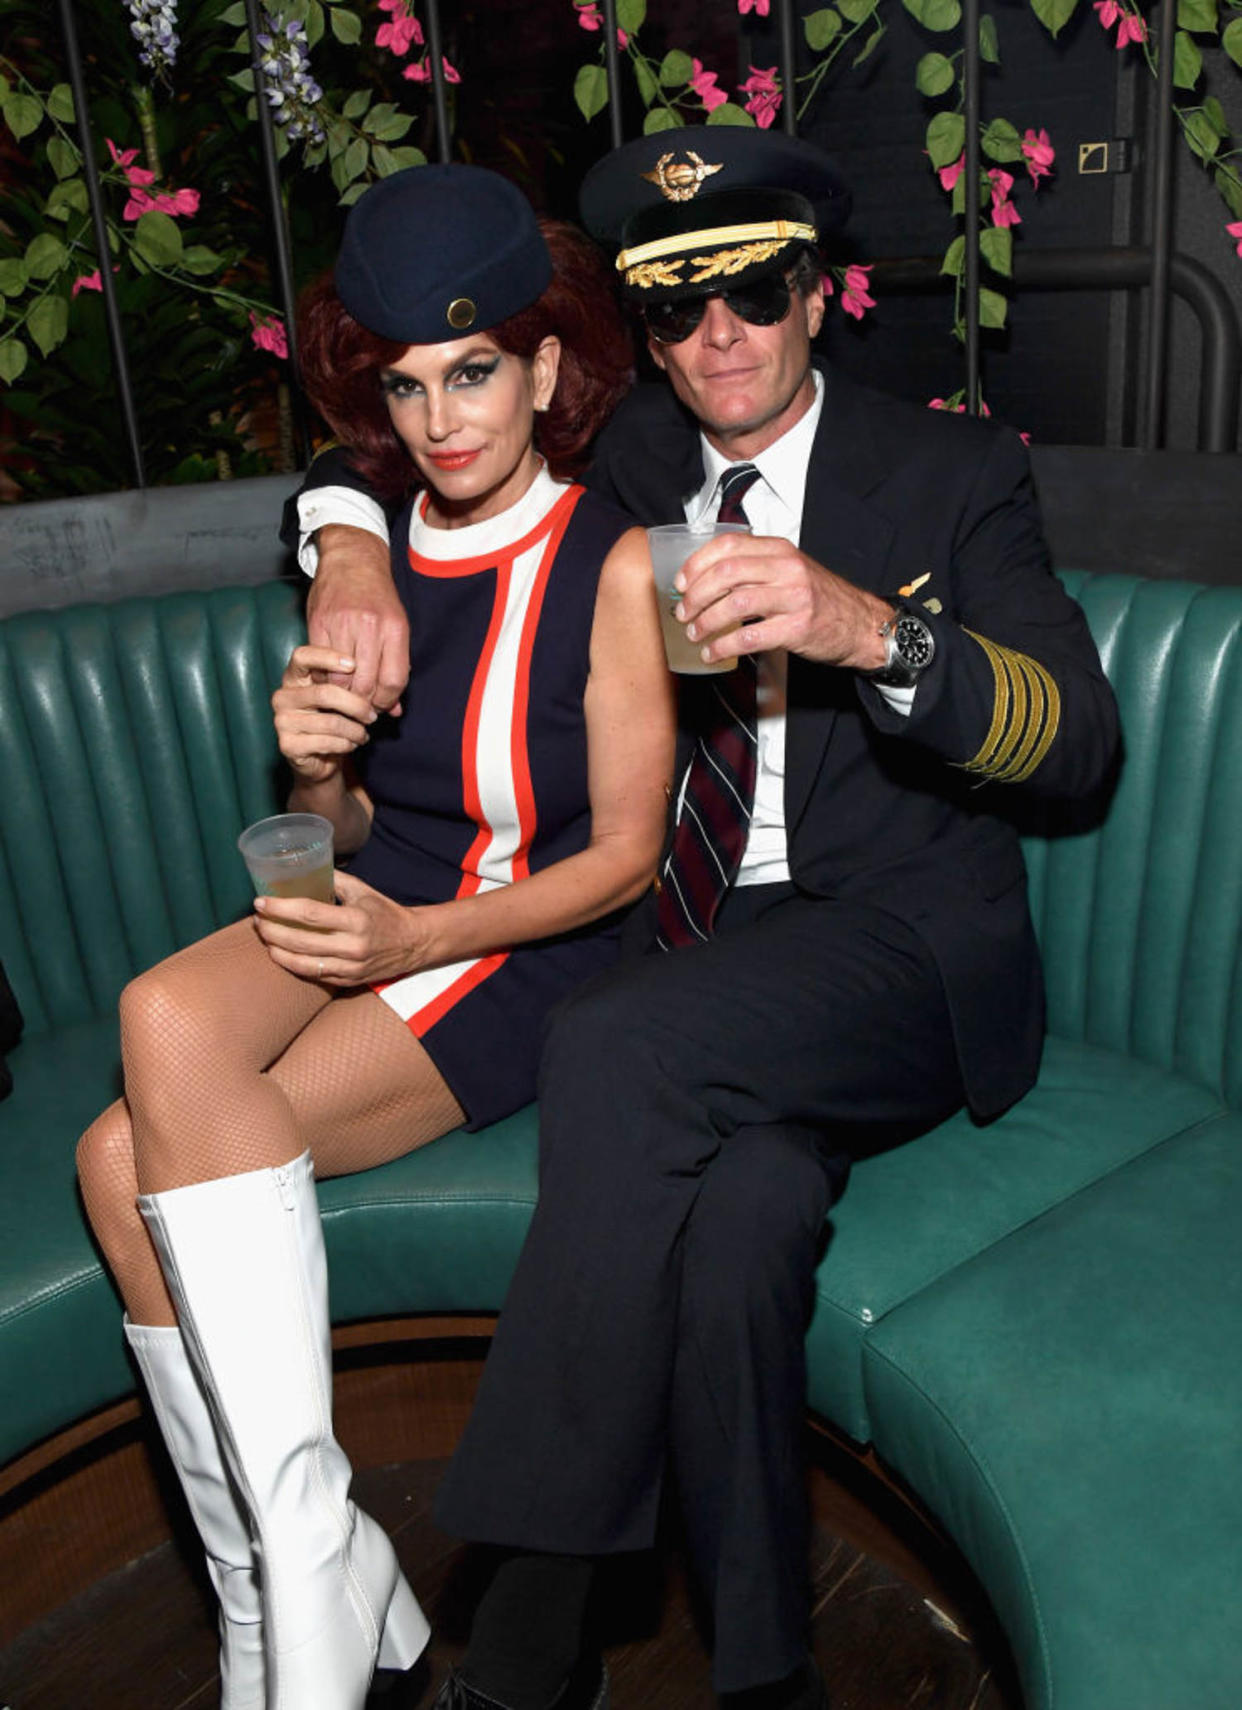 famous couples costumes cindy crawford rande gerber as flight attendant and pilot (Kevin Mazur / Getty Images for Casamigos)